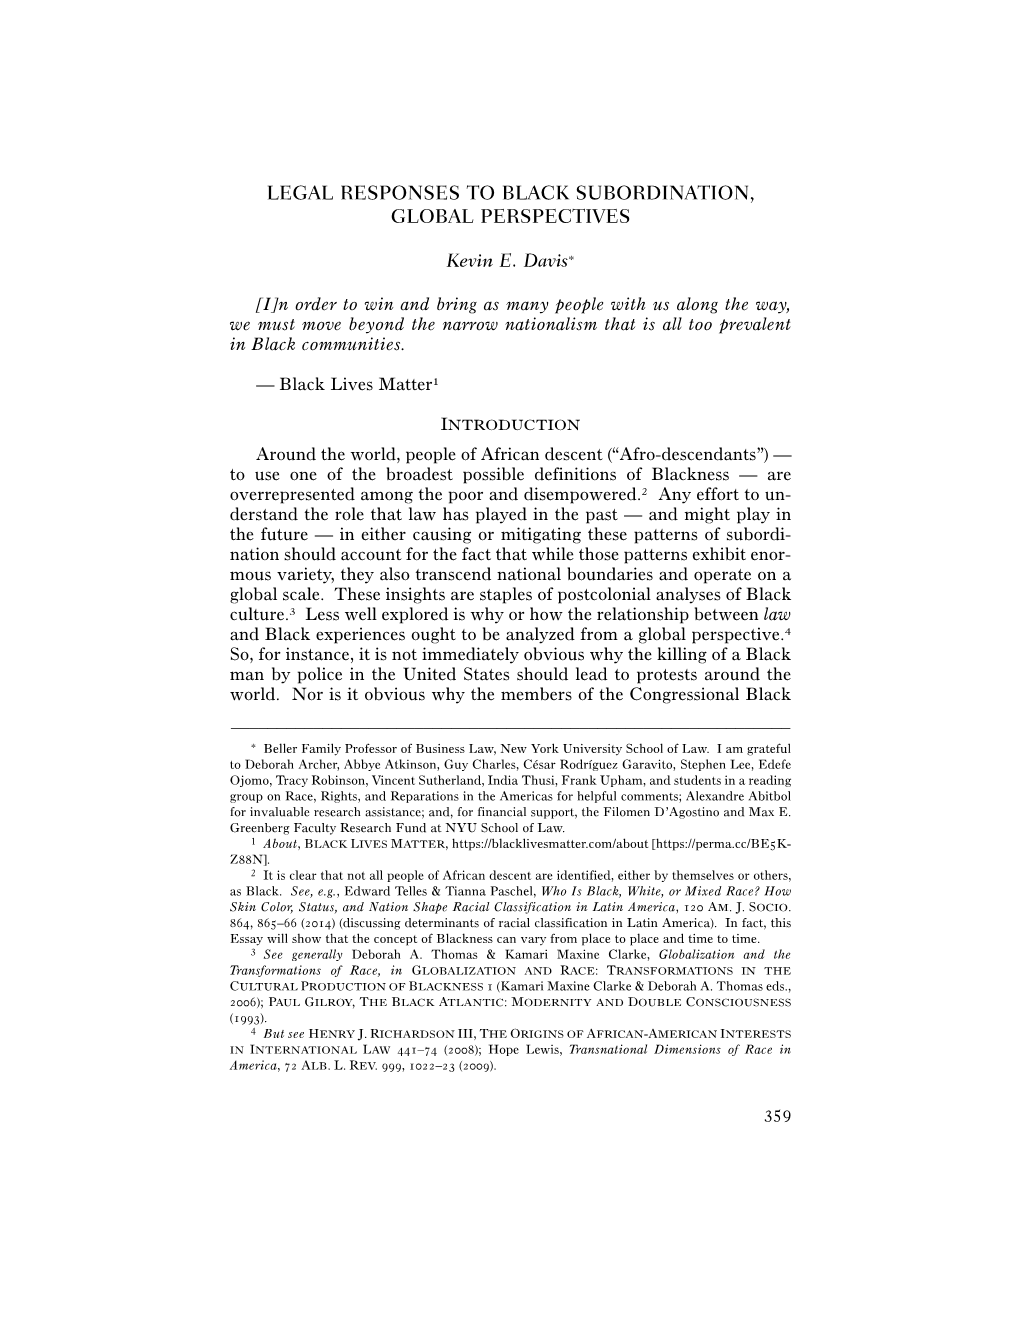 Legal Responses to Black Subordination, Global Perspectives